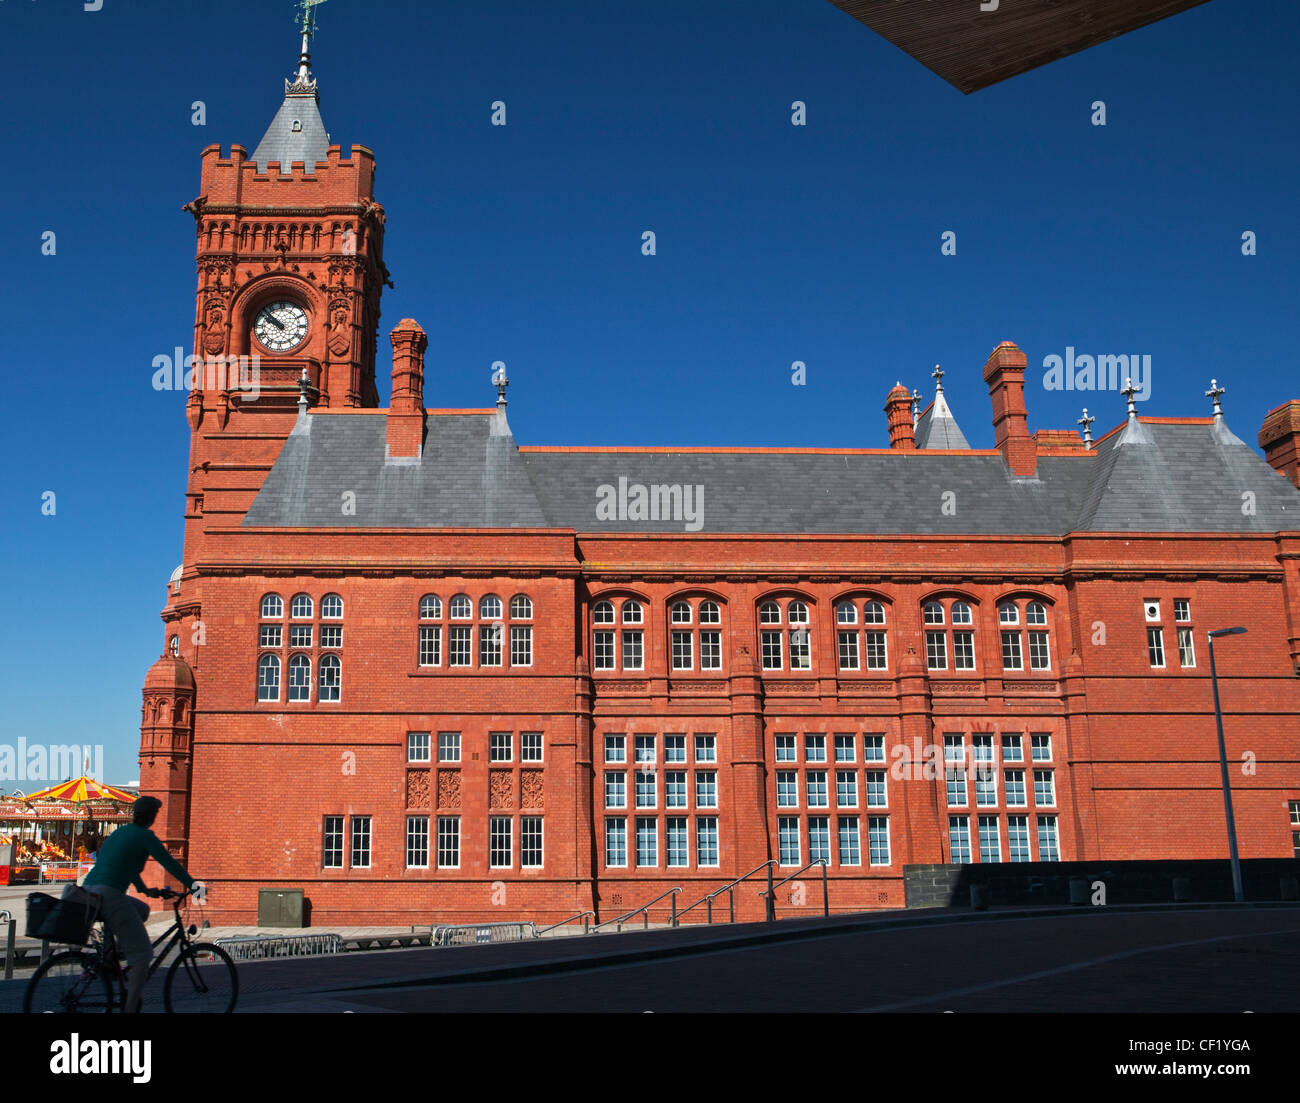 The Pierhead building, a Grade 1 listed building in Cardiff Bay. The building was originally built in 1891 as the headquarters f Stock Photo